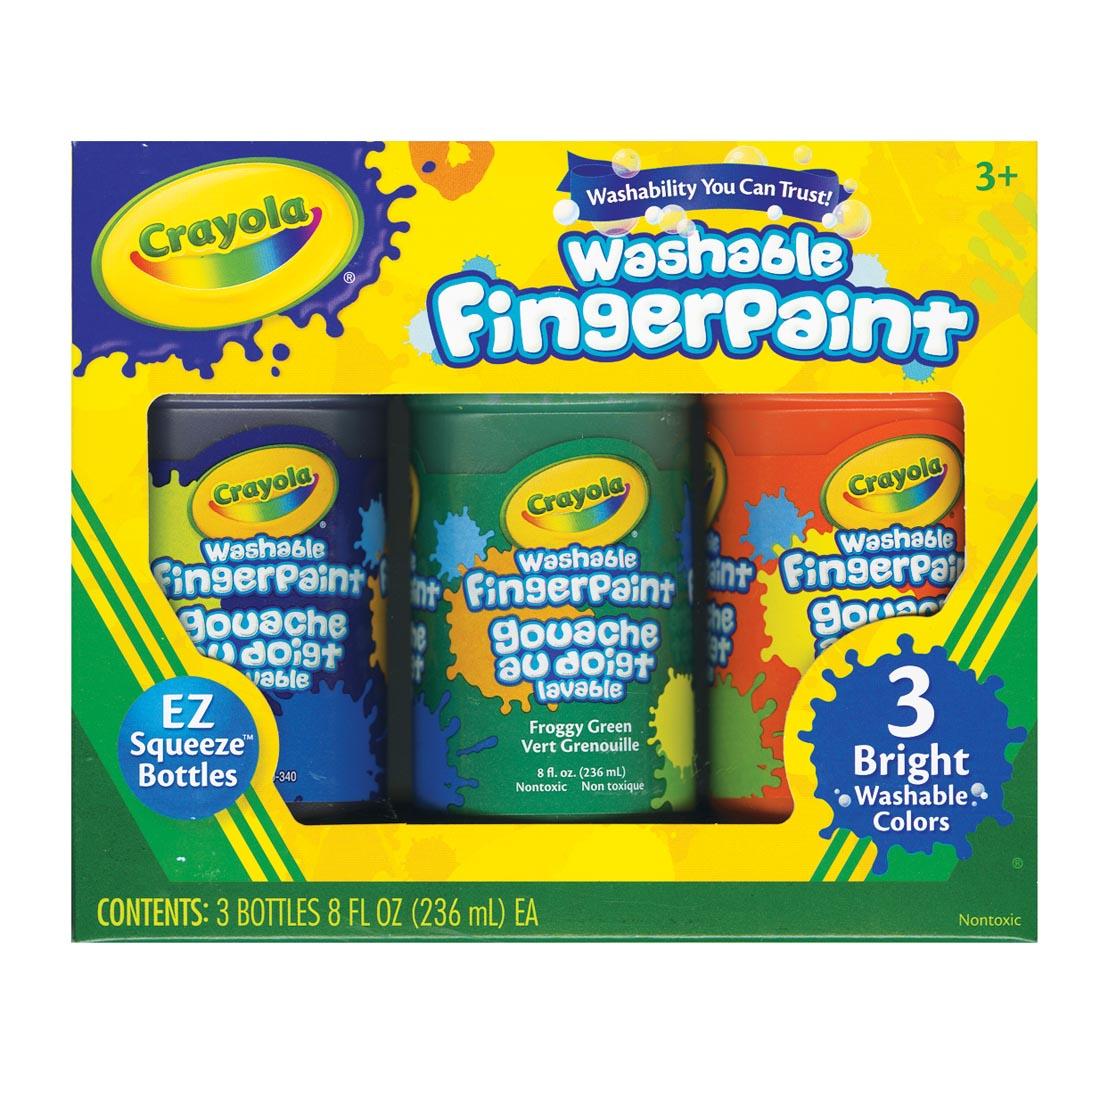 Package of Crayola Washable Bright Fingerpaint with 3 colors